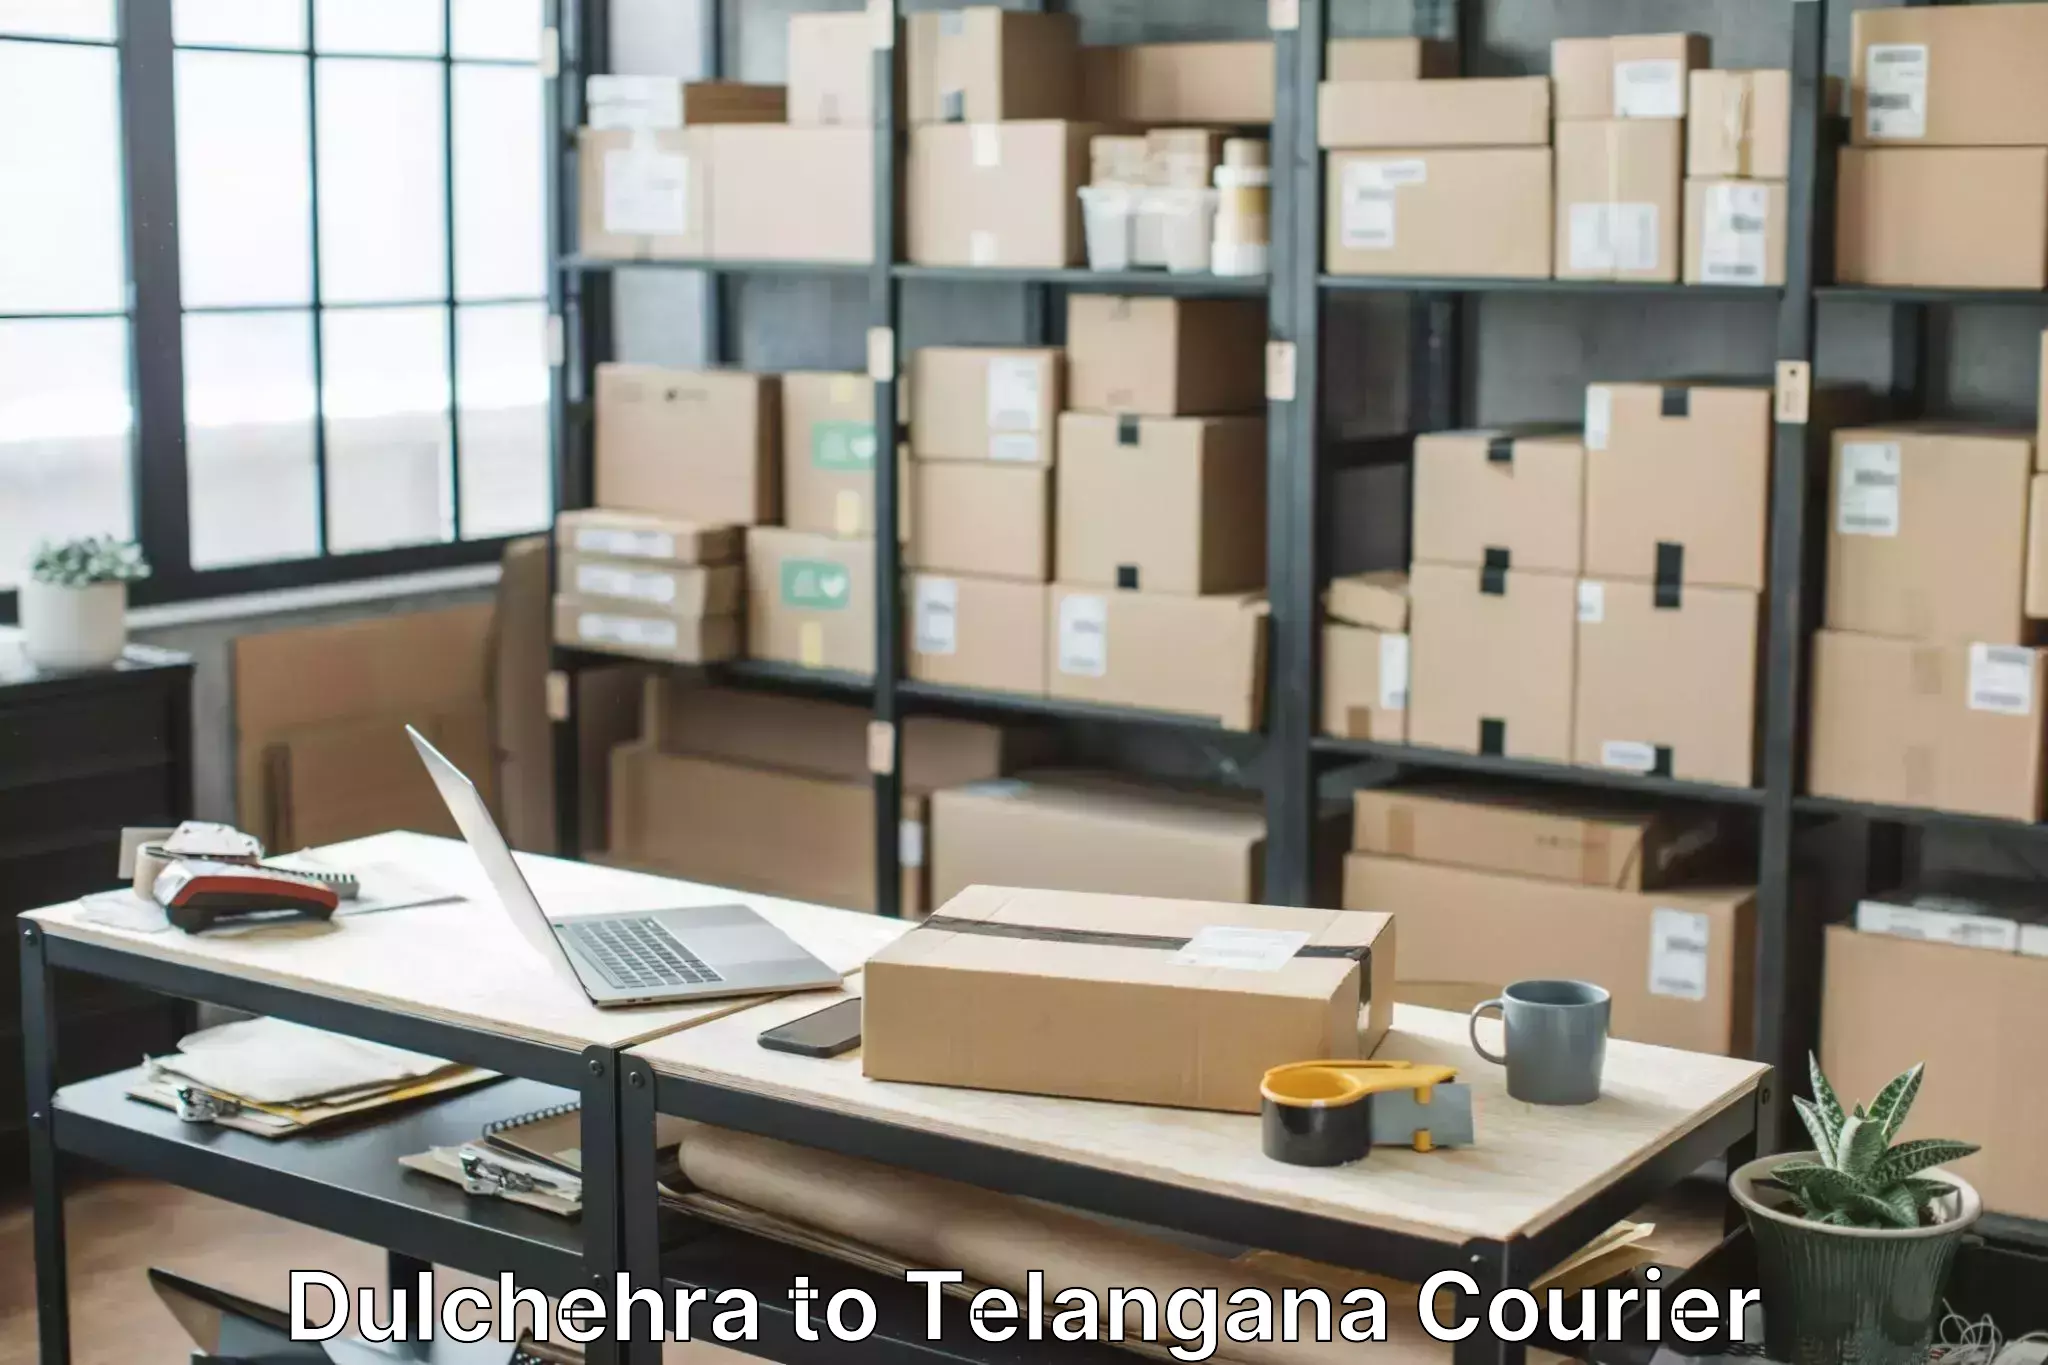 Quality relocation services Dulchehra to Babasagar